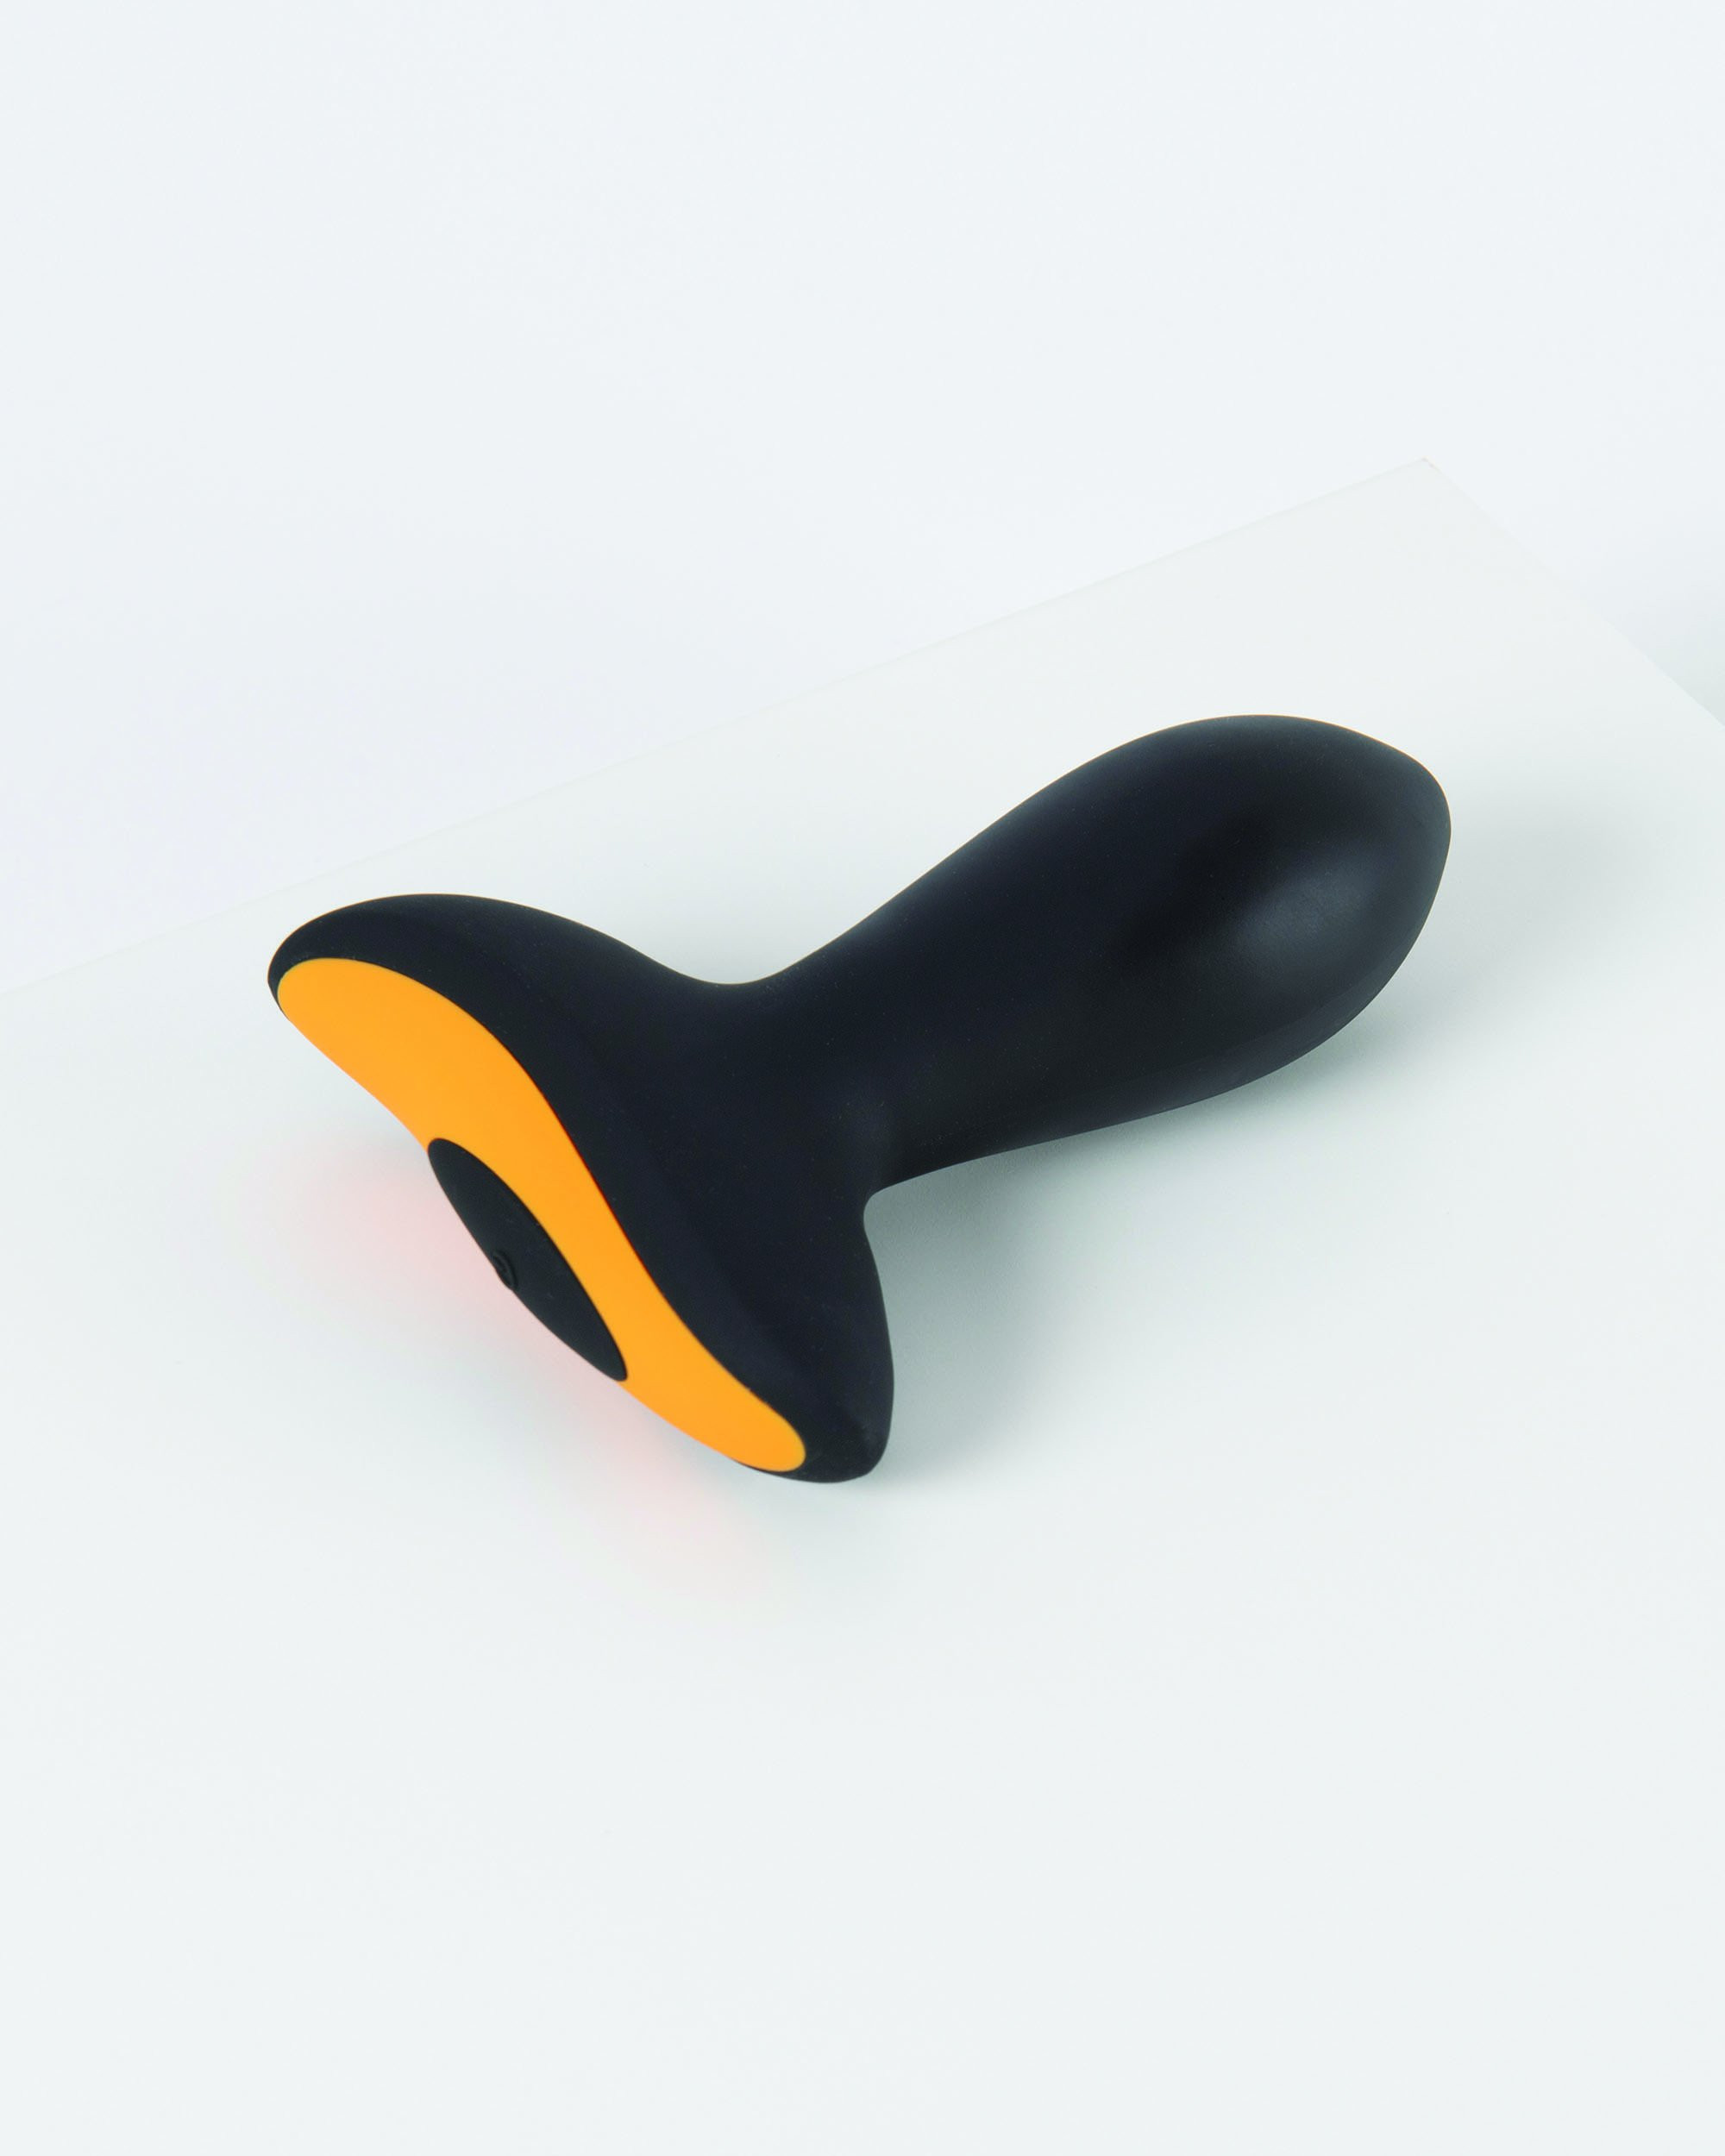 This butt plug is packed with intense vibration power. This anal toy delivers deep vibrations to target the surrounding pleasure spots and reach more nerve endings than ever before. The soft-touch silicone offers maximum comfort, while the 6 power sett #sex